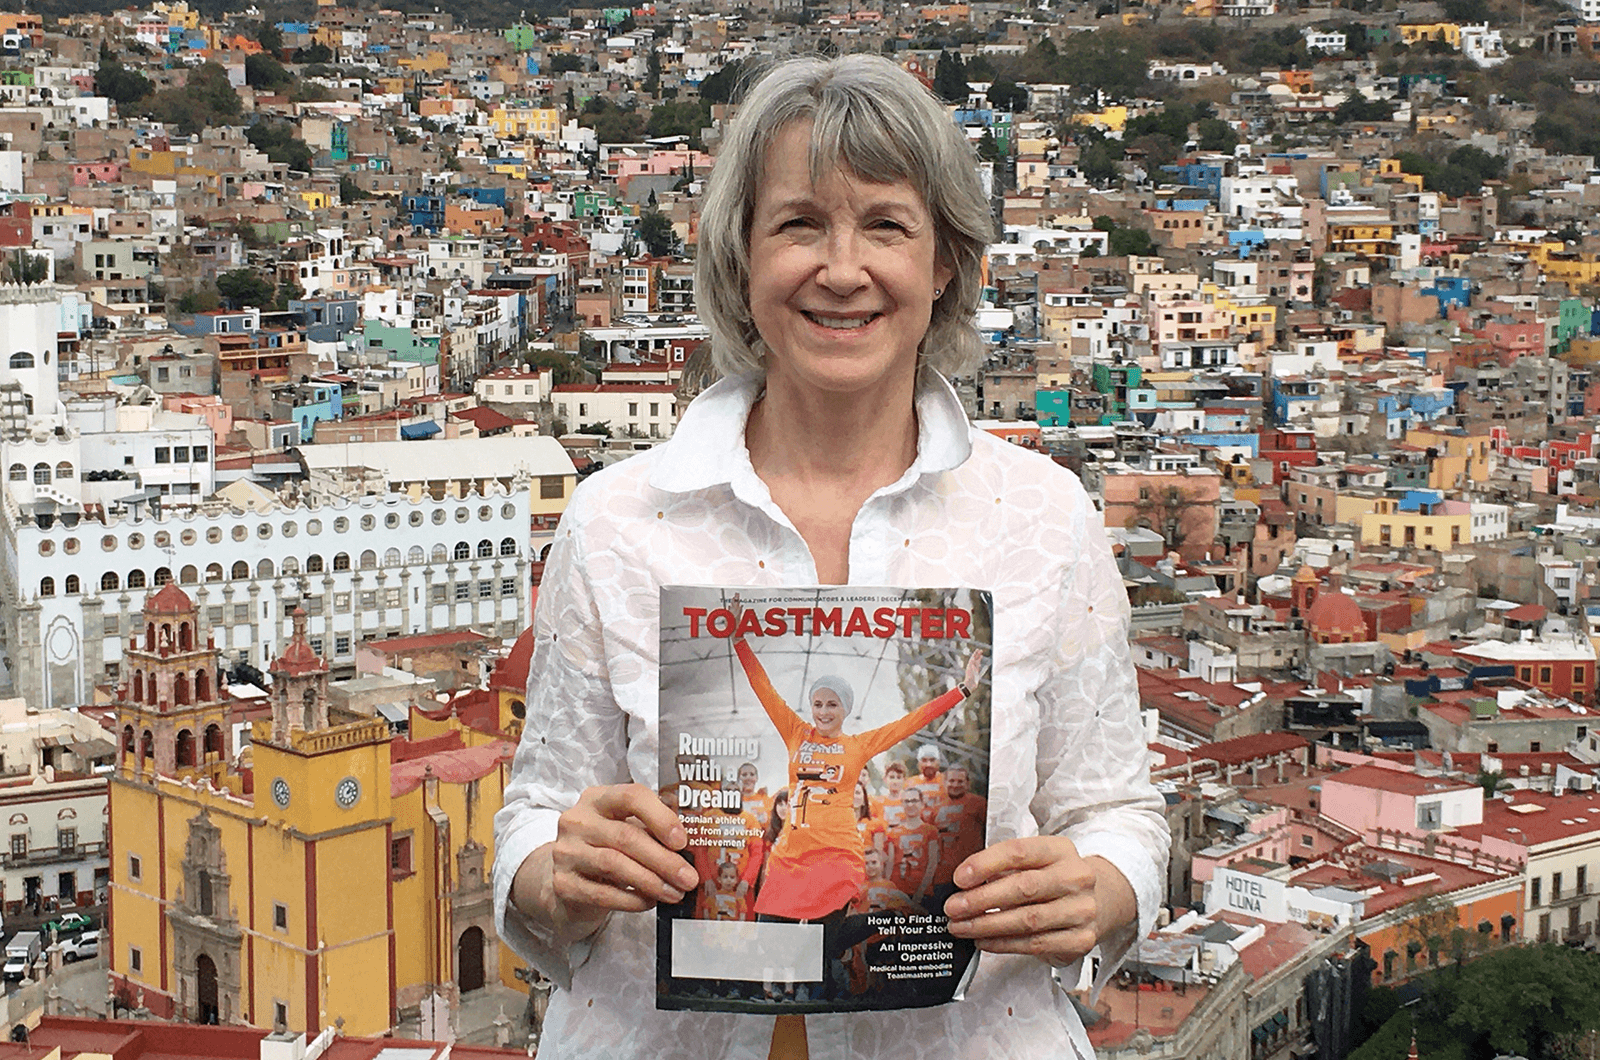 Barbara Sugawara of Surrey, British Columbia, Canada, overlooks the colorful town of Guanajuato, Mexico, which was named a UNESCO World Heritage Site in 1988. 